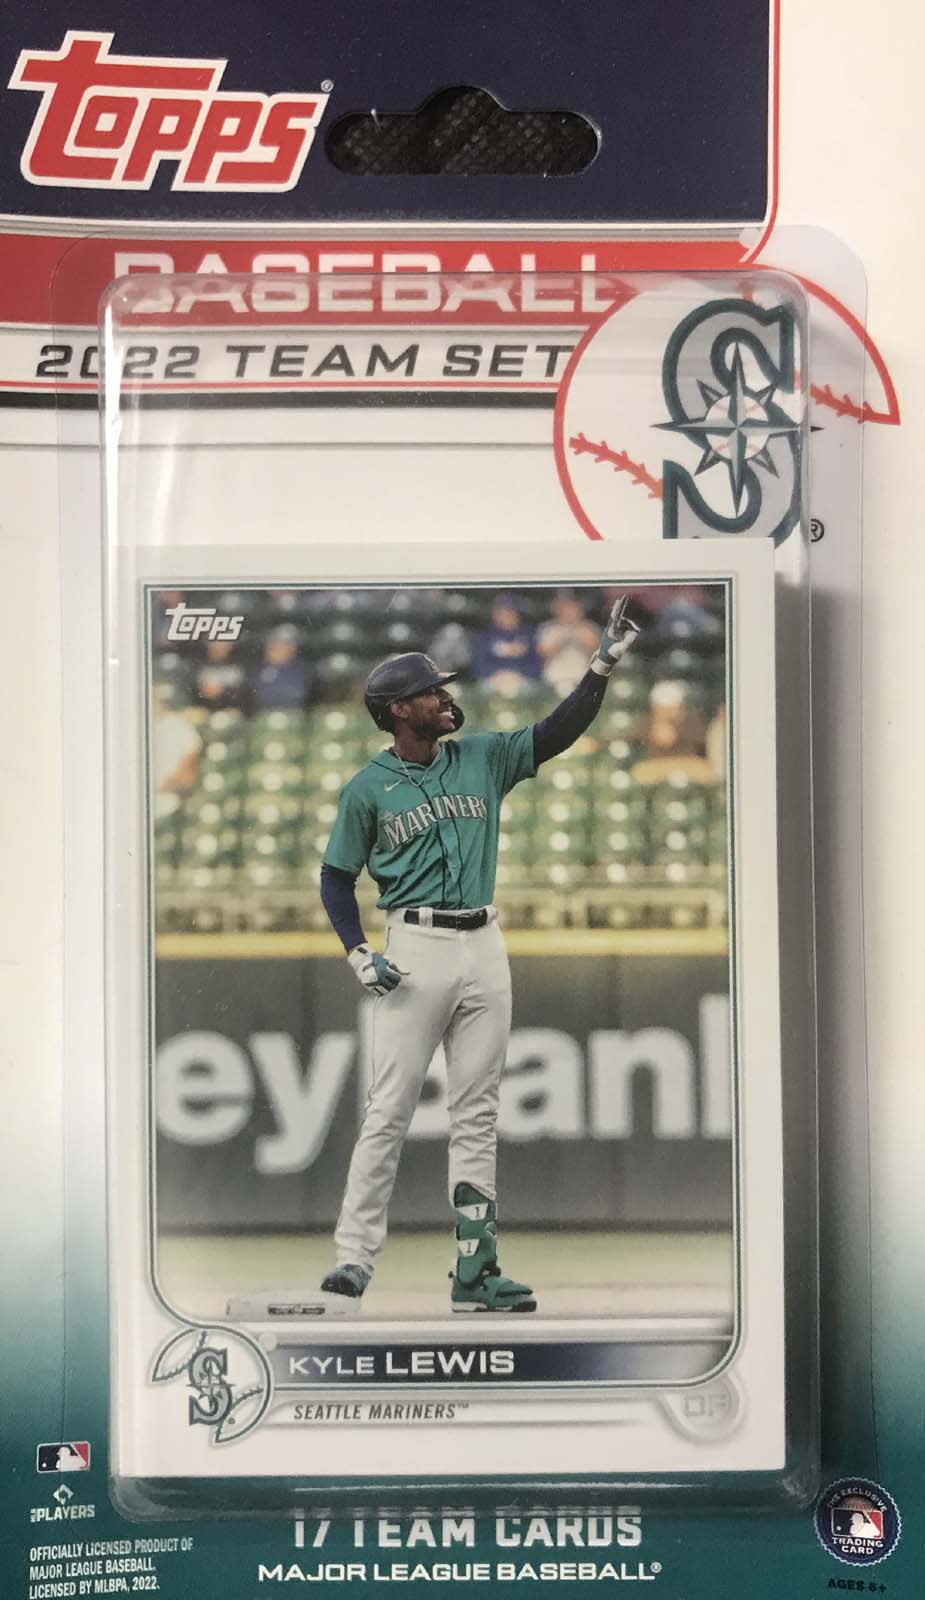 Miami Marlins / 2022 Topps Baseball Team Set (Series 1 and 2) with (23)  Cards. PLUS 2021 Topps Marlins Baseball Team Set (Series 1 and 2) with (25)